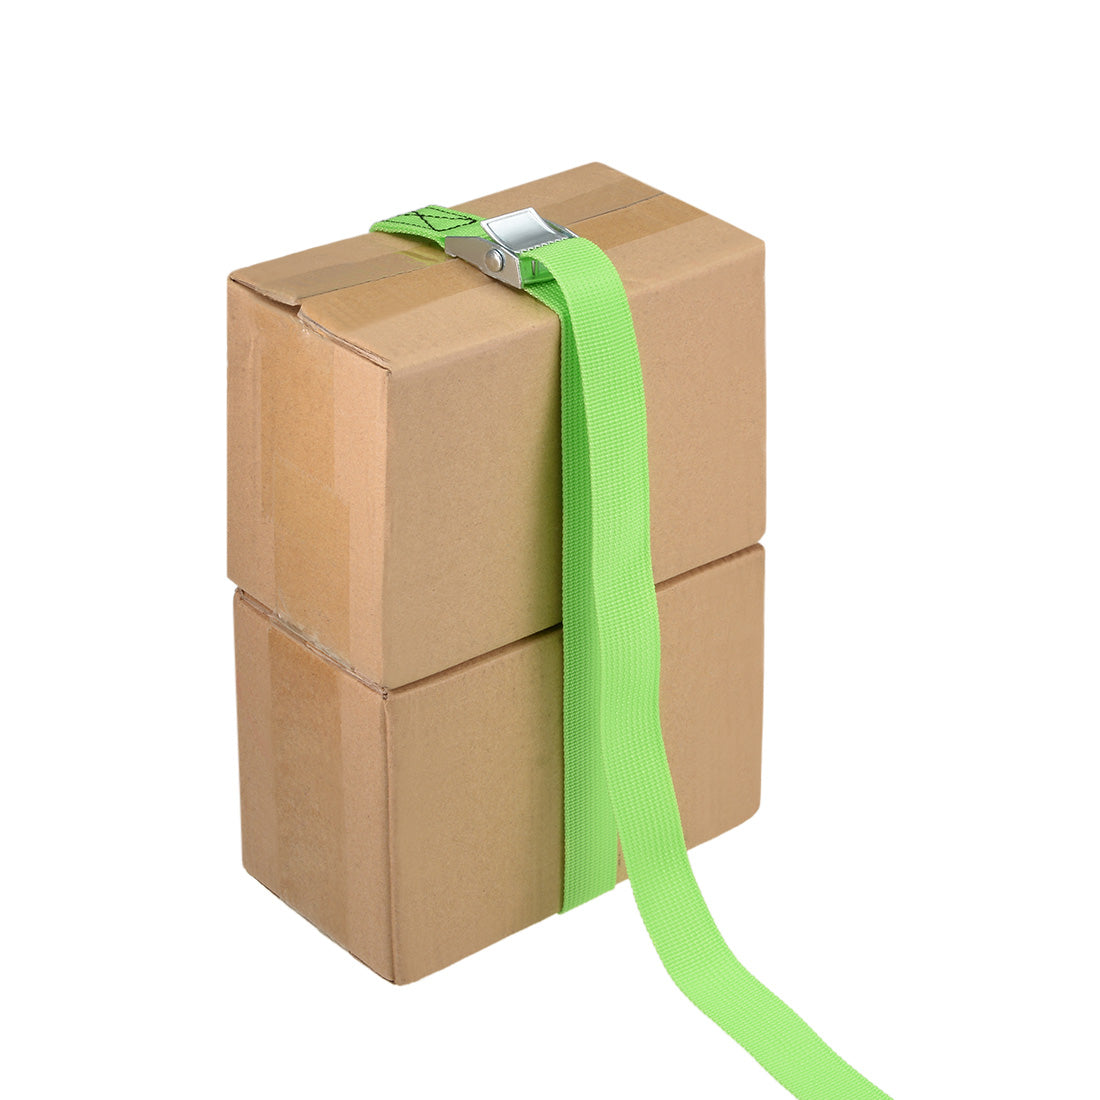 uxcell Uxcell Lashing Strap 1" x 20' Cargo Tie Down Straps with Cam Lock Buckle Up to 551lbs Green 2pcs